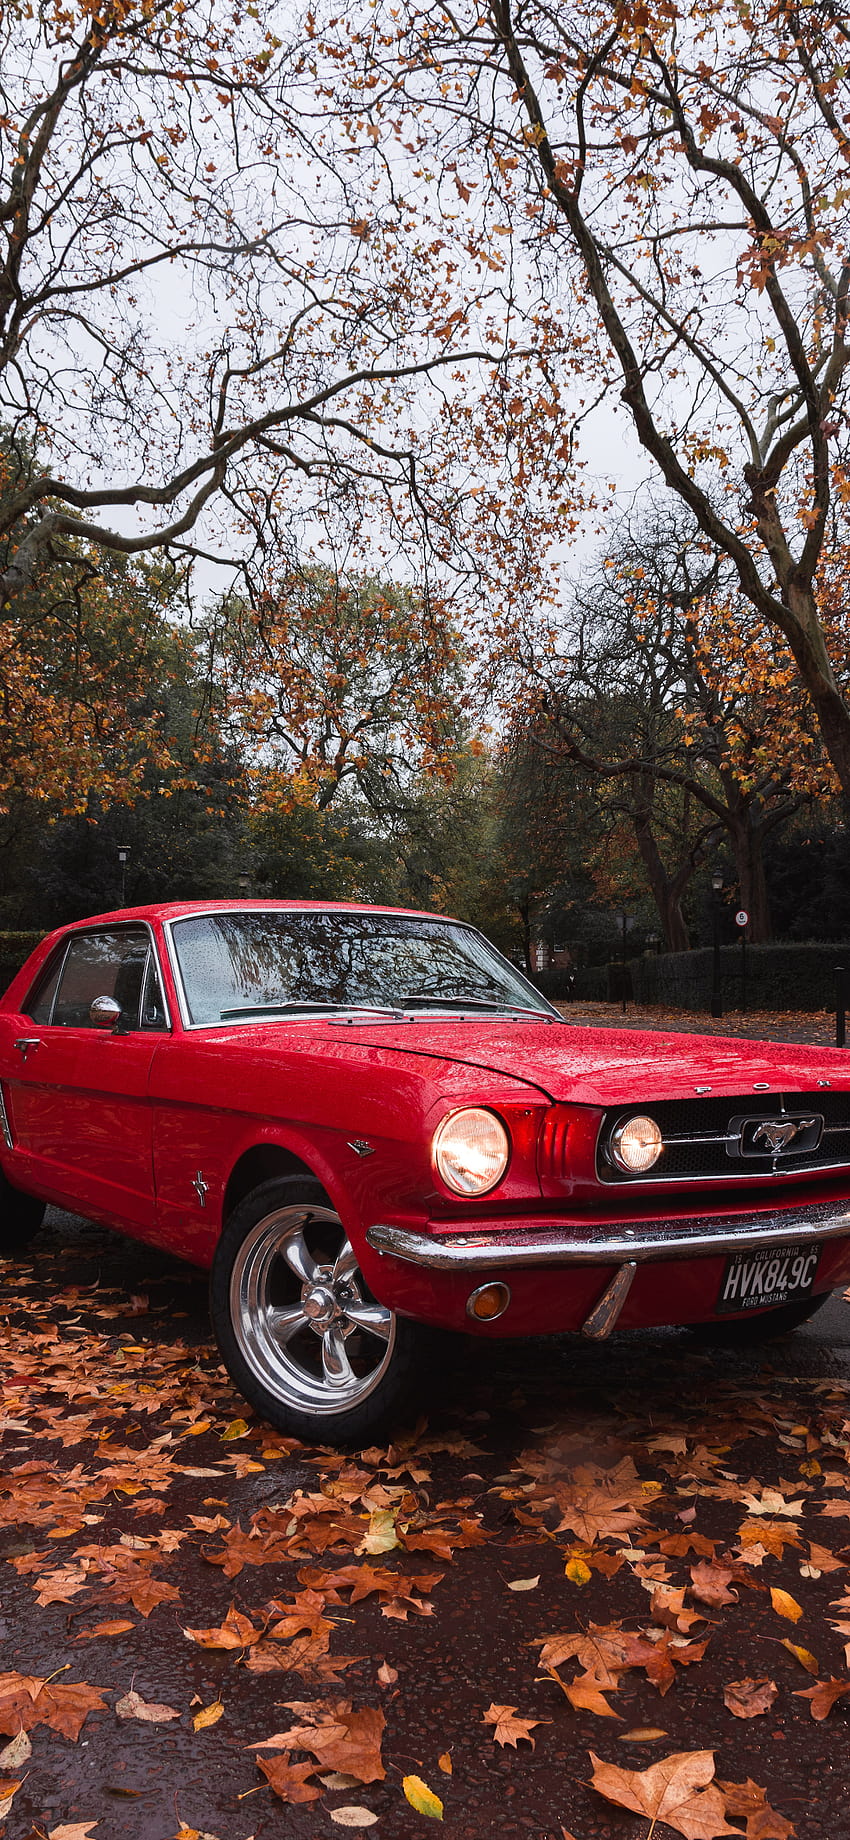 Ford Mustang for iPhone 11, Pro Max, X, 8, 7, 6, 1965 ford mustang HD phone wallpaper